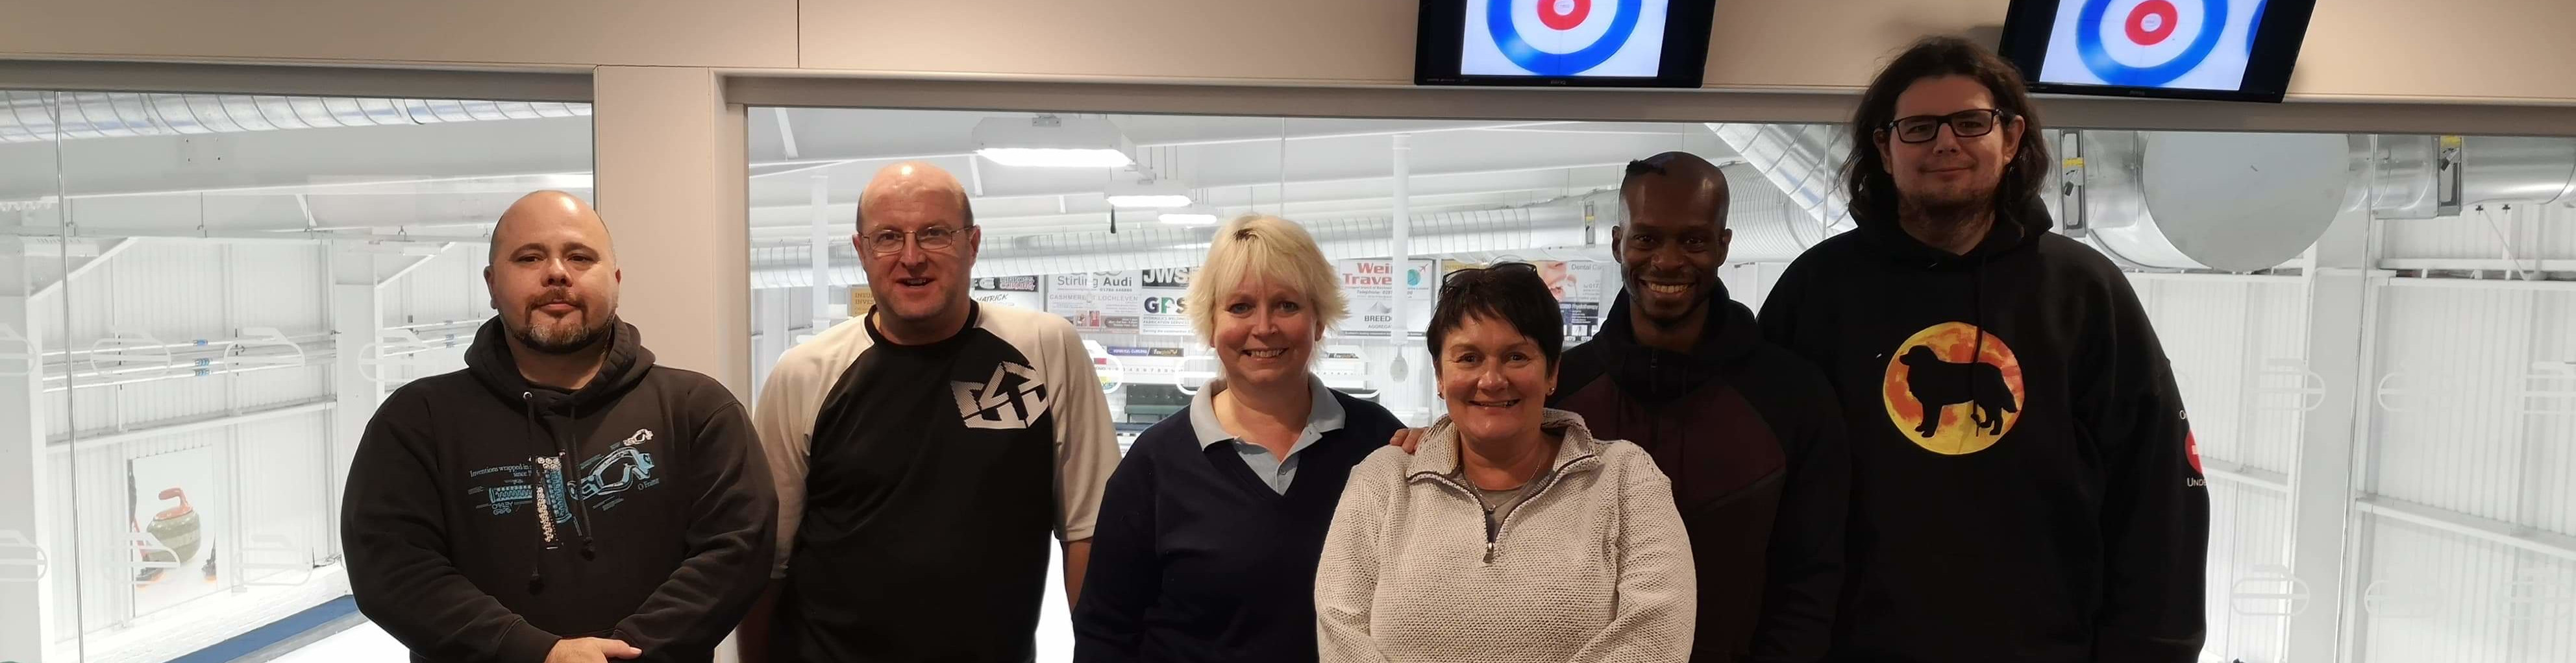 Cupar Bowmen members at Kinross Curling club for sports crossover weekend.